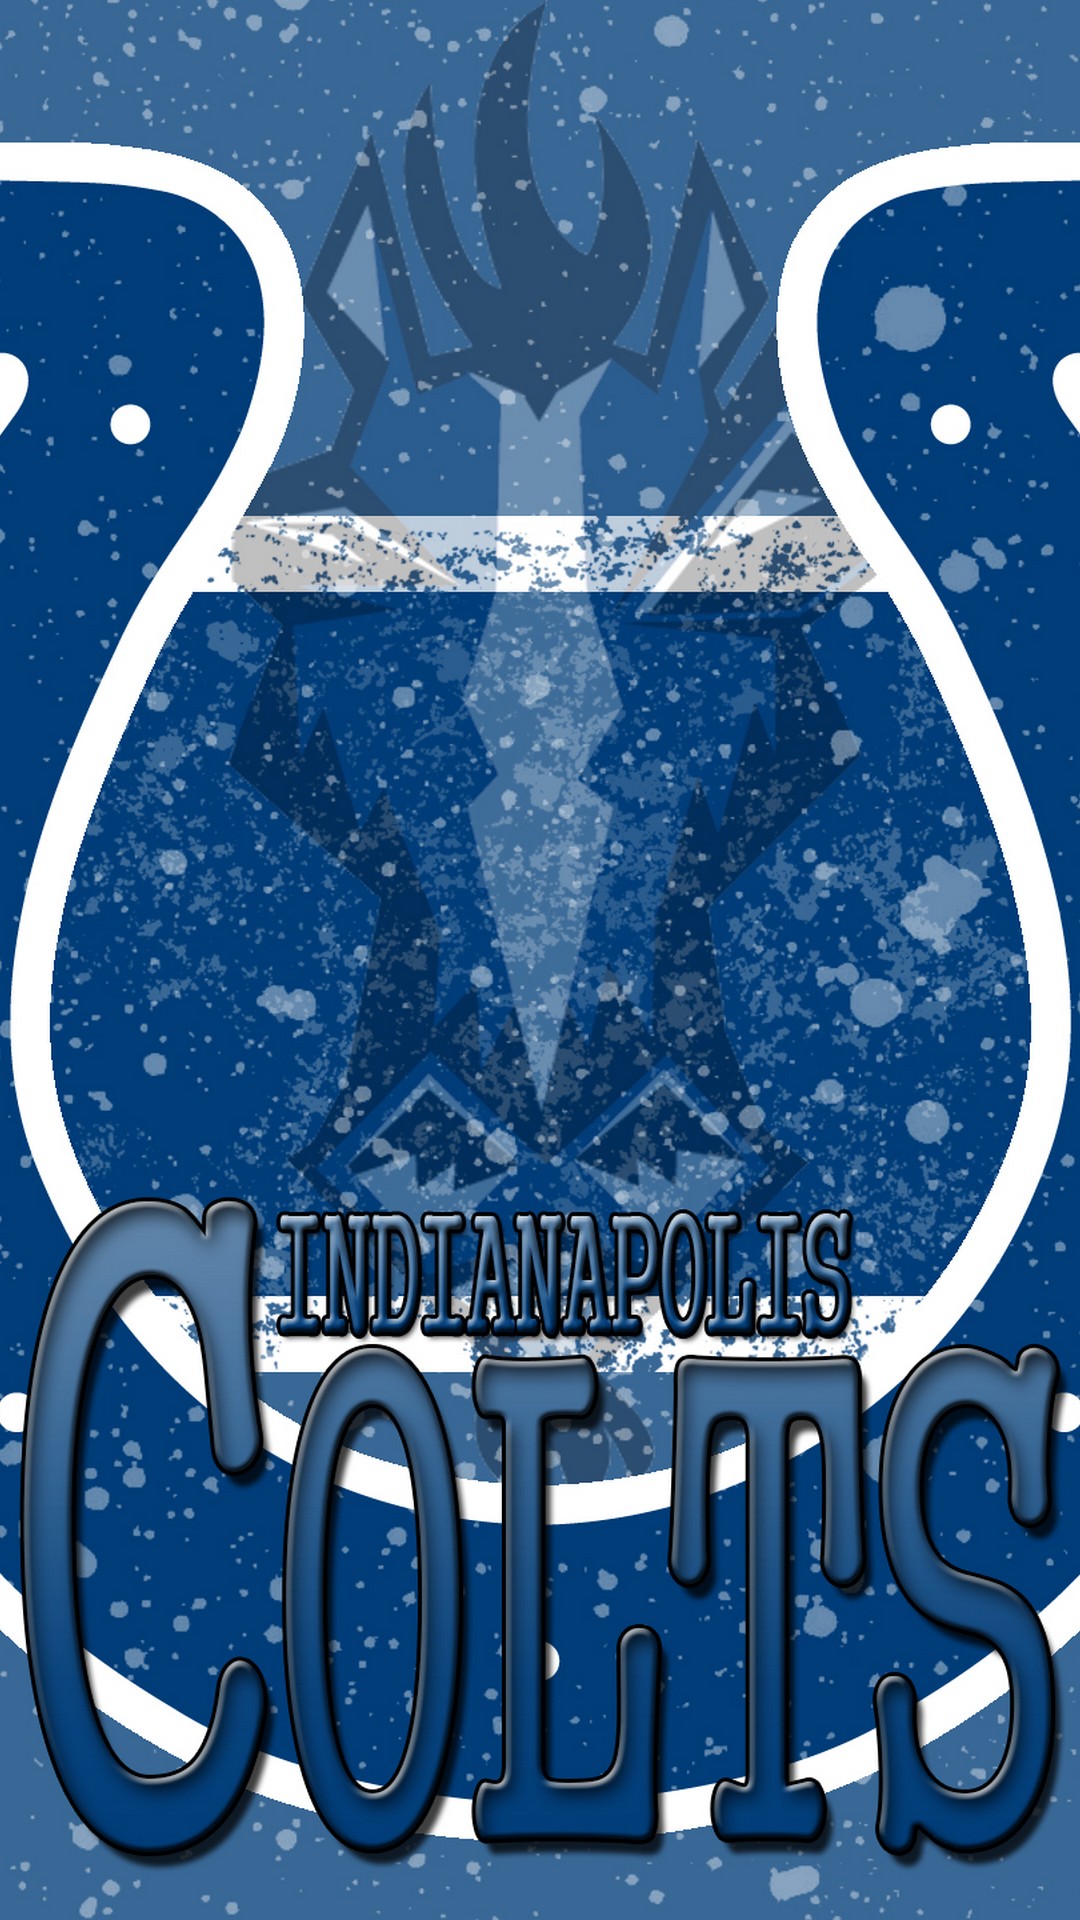 Indianapolis Colts HD Wallpaper For iPhone Nfl Football